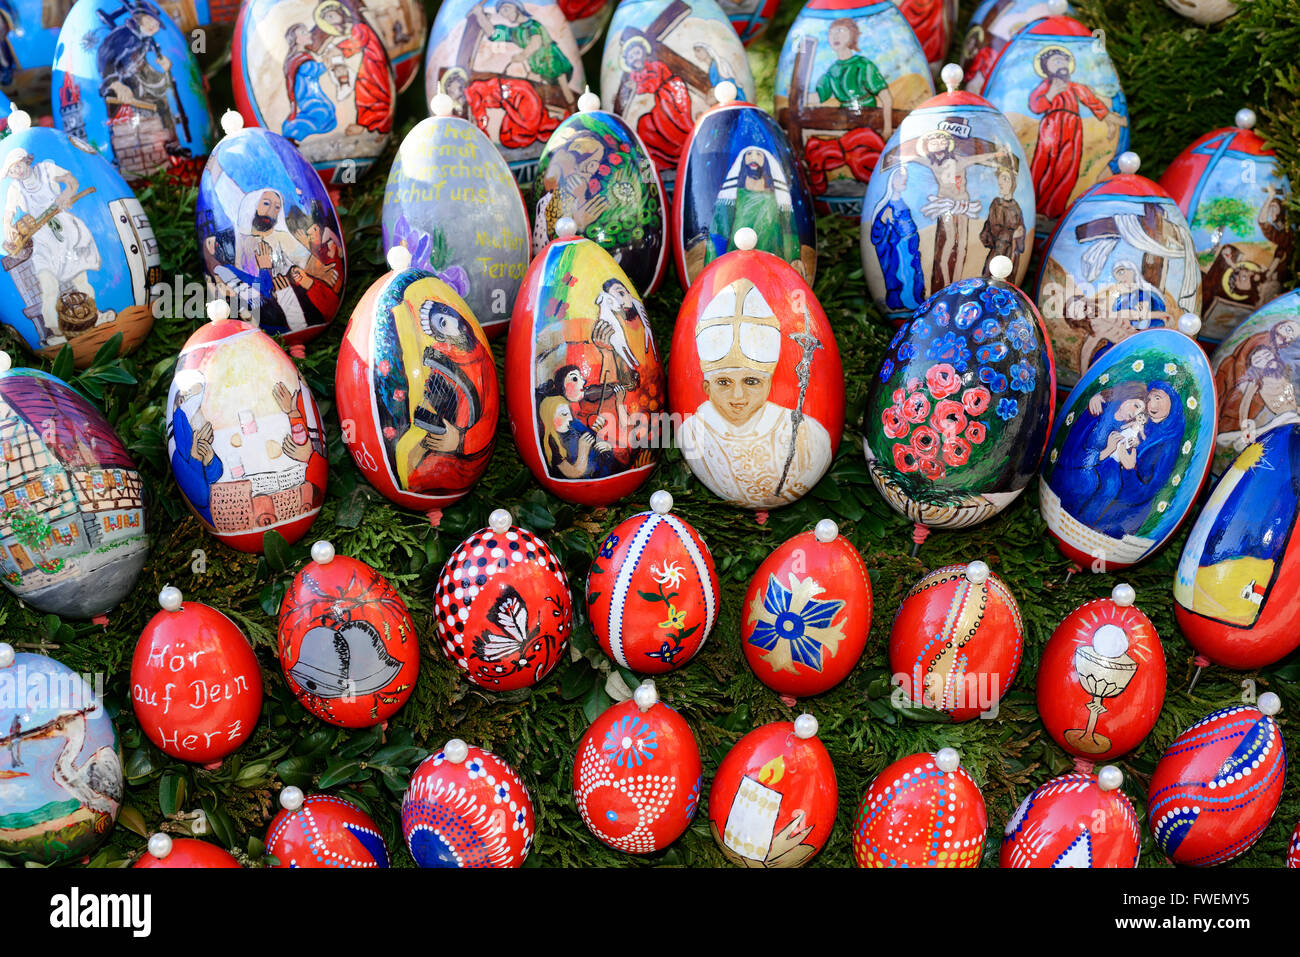 Painted Easter eggs with biblical scenes on an Easter well, Osterbrunnen, Schechingen, Baden-Württemberg, Germany Stock Photo